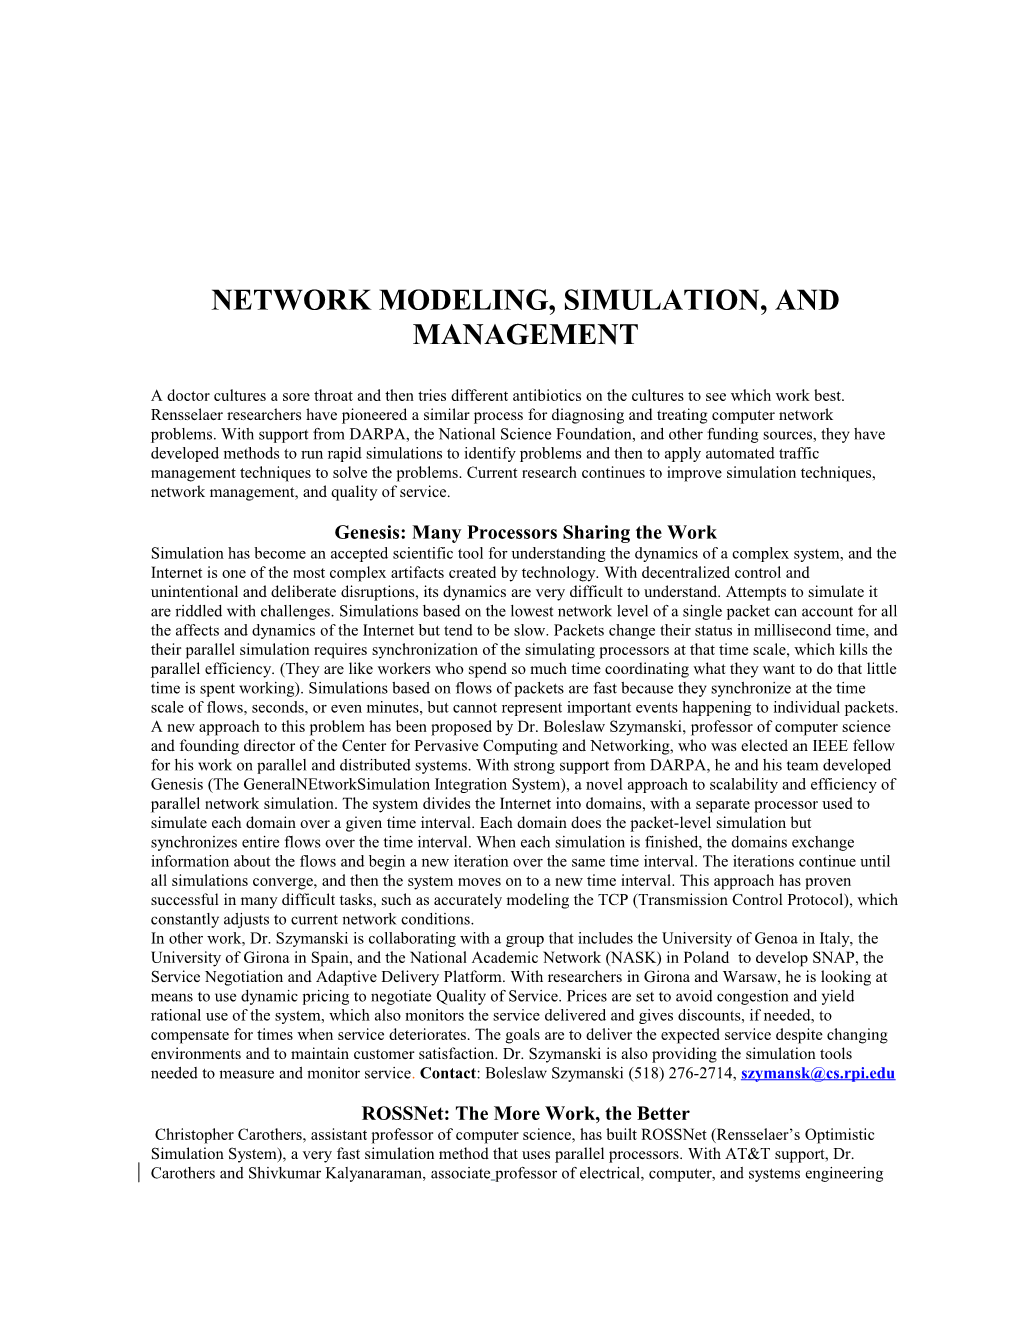 Network Modeling, Simulation, and Management